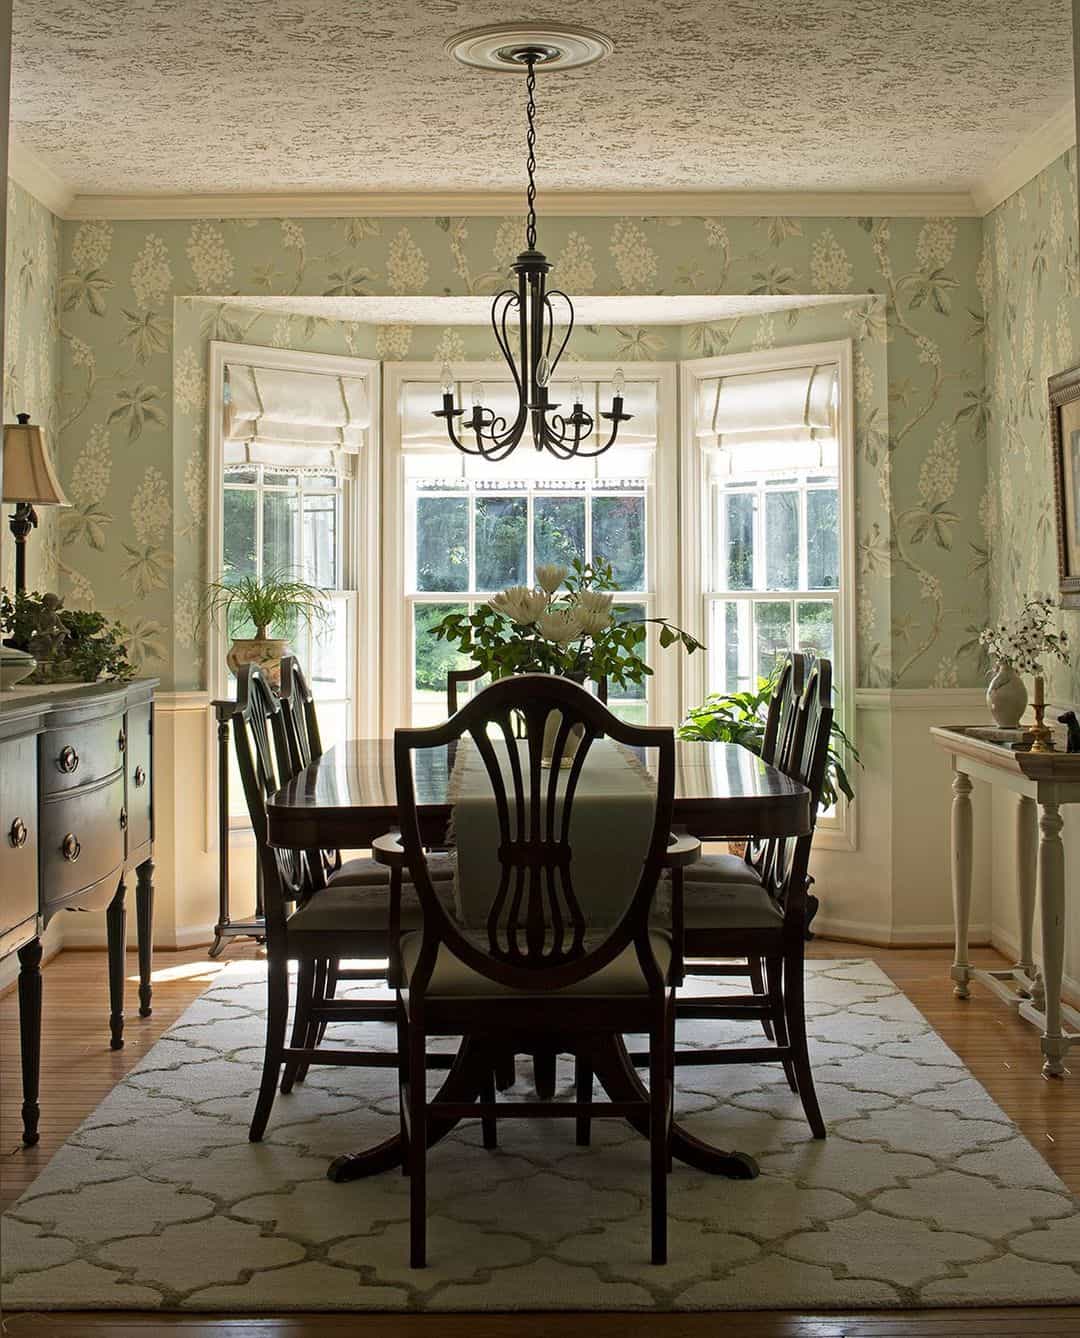 Cottage Farmhouse-inspired Design for a Small Dining Room - Soul & Lane